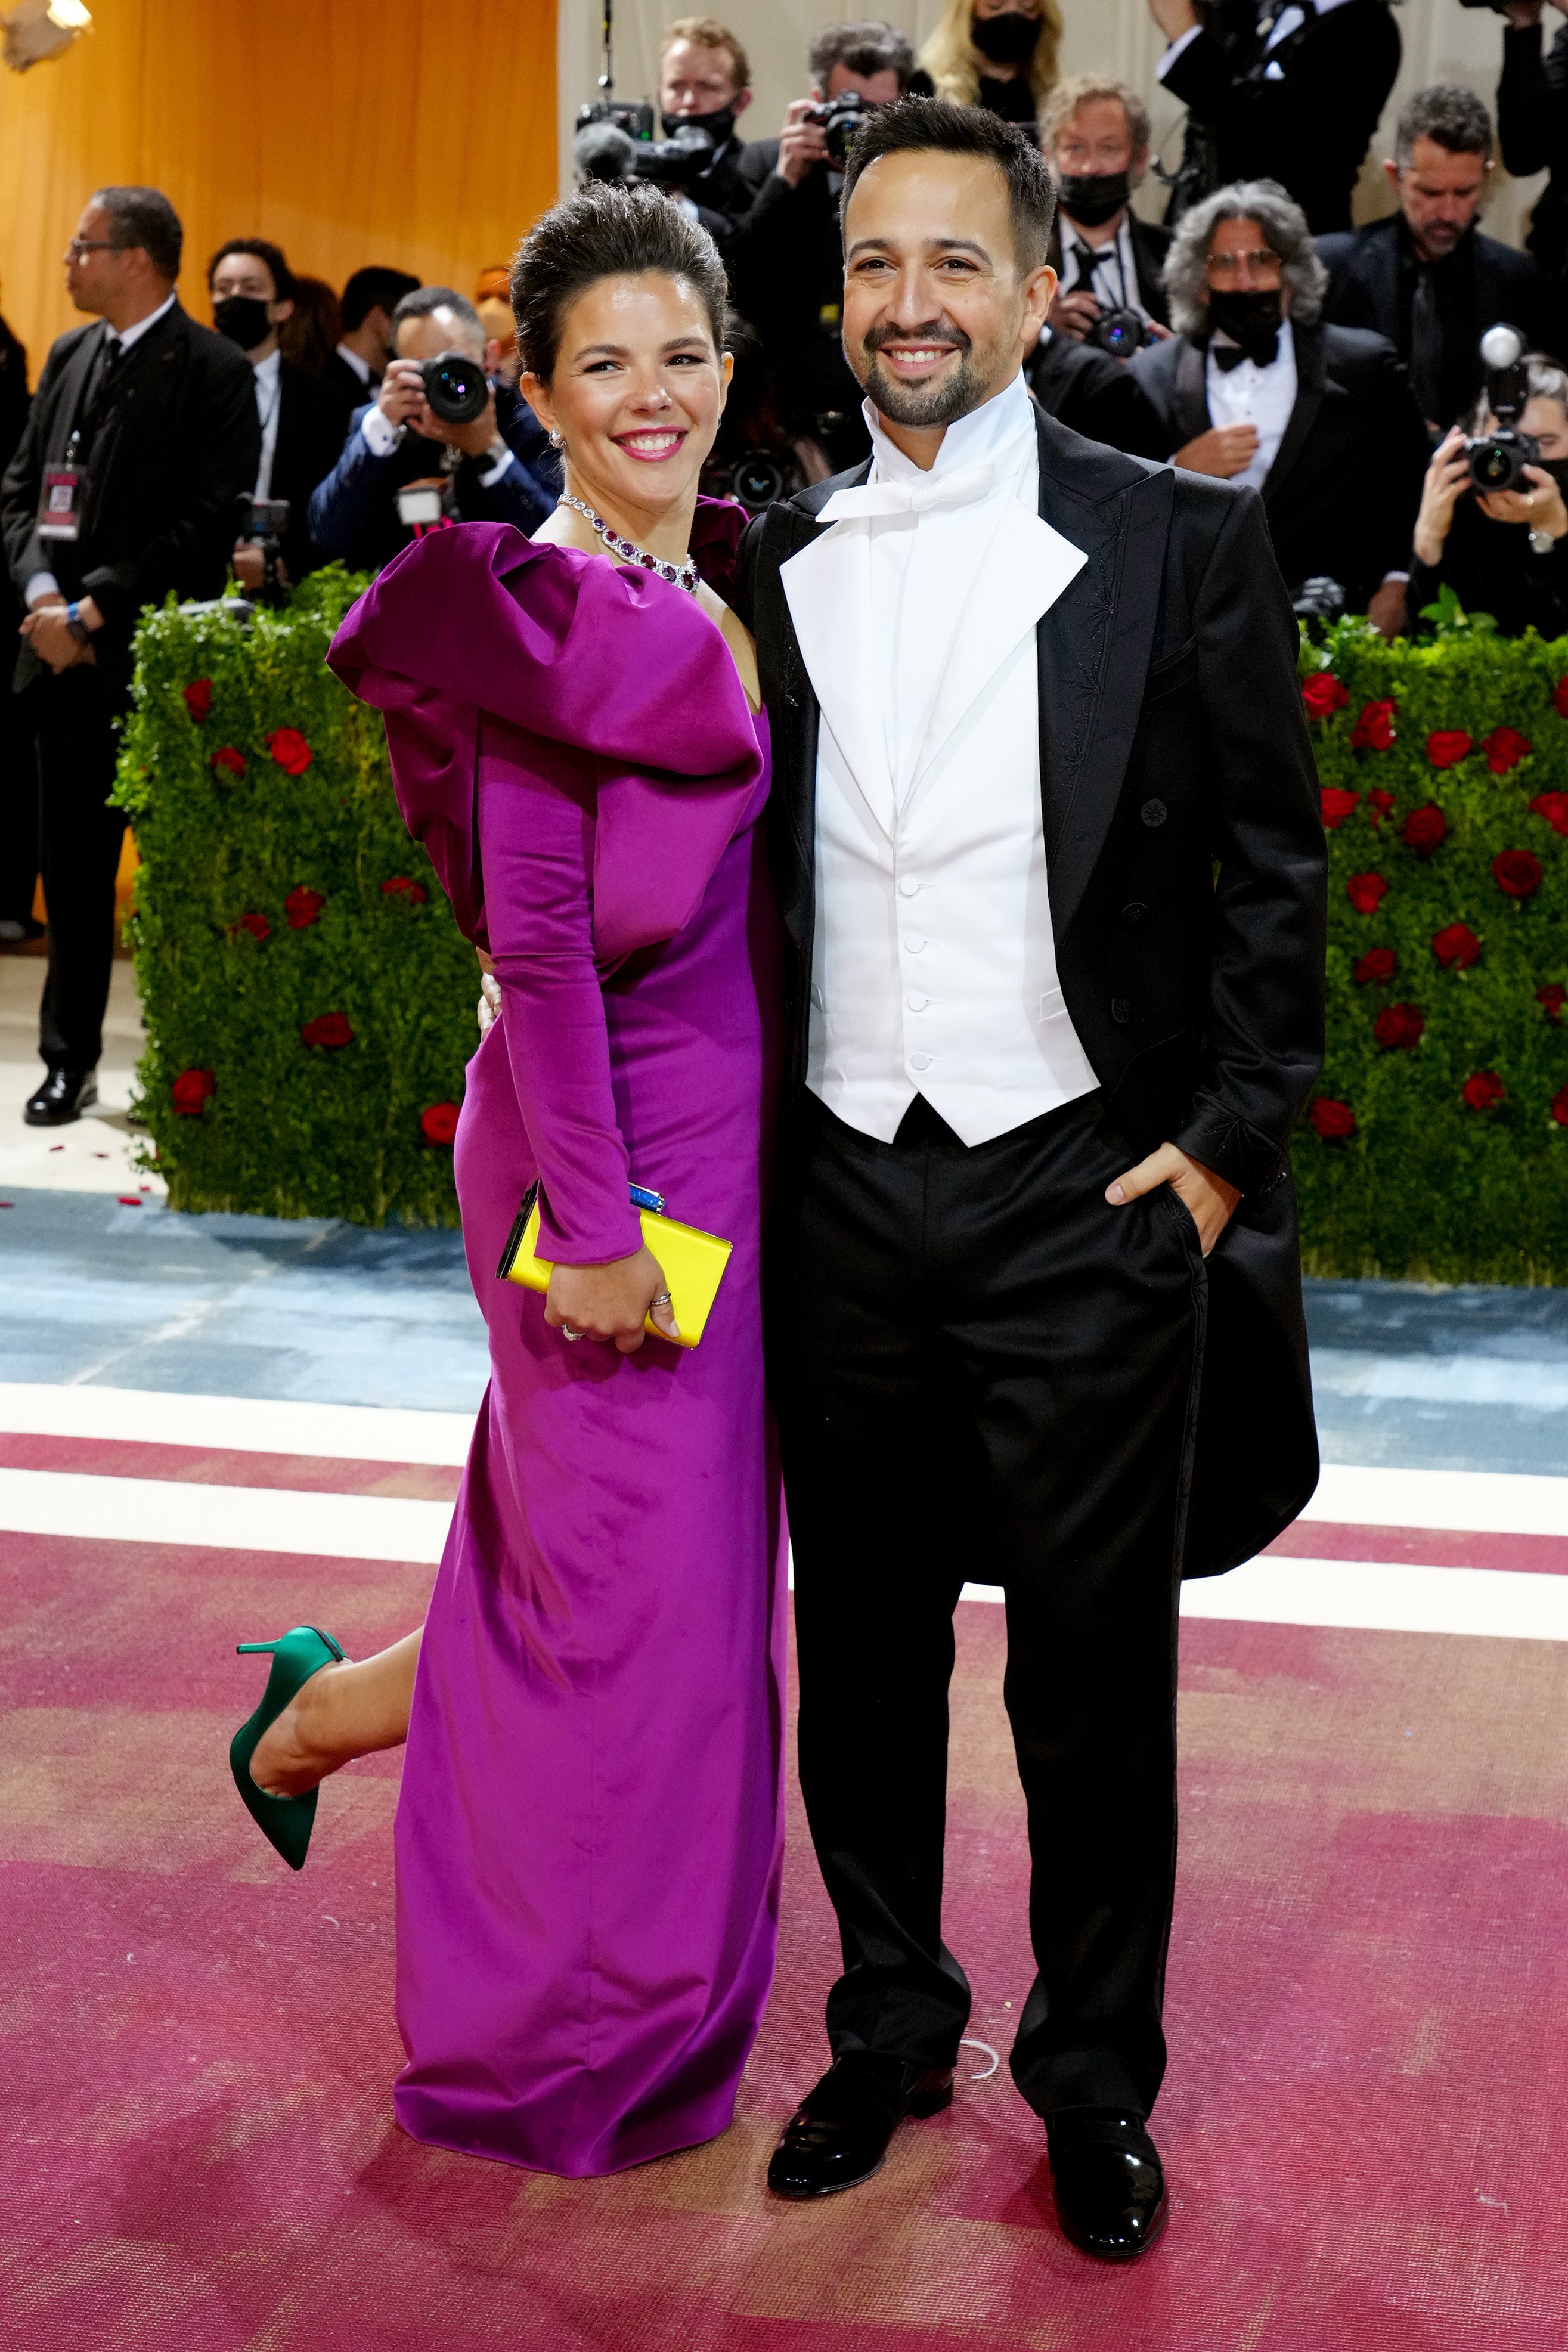 NEW YORK, NEW YORK - MAY 02: (L-R) Vanessa Nadal and Lin-Manuel Miranda attend The 2022 Met Gala Celebrating "In America: An Anthology of Fashion" at The Metropolitan Museum of Art on May 02, 2022 in New York City. (Photo by Jeff Kravitz/FilmMagic) (Foto: FilmMagic)